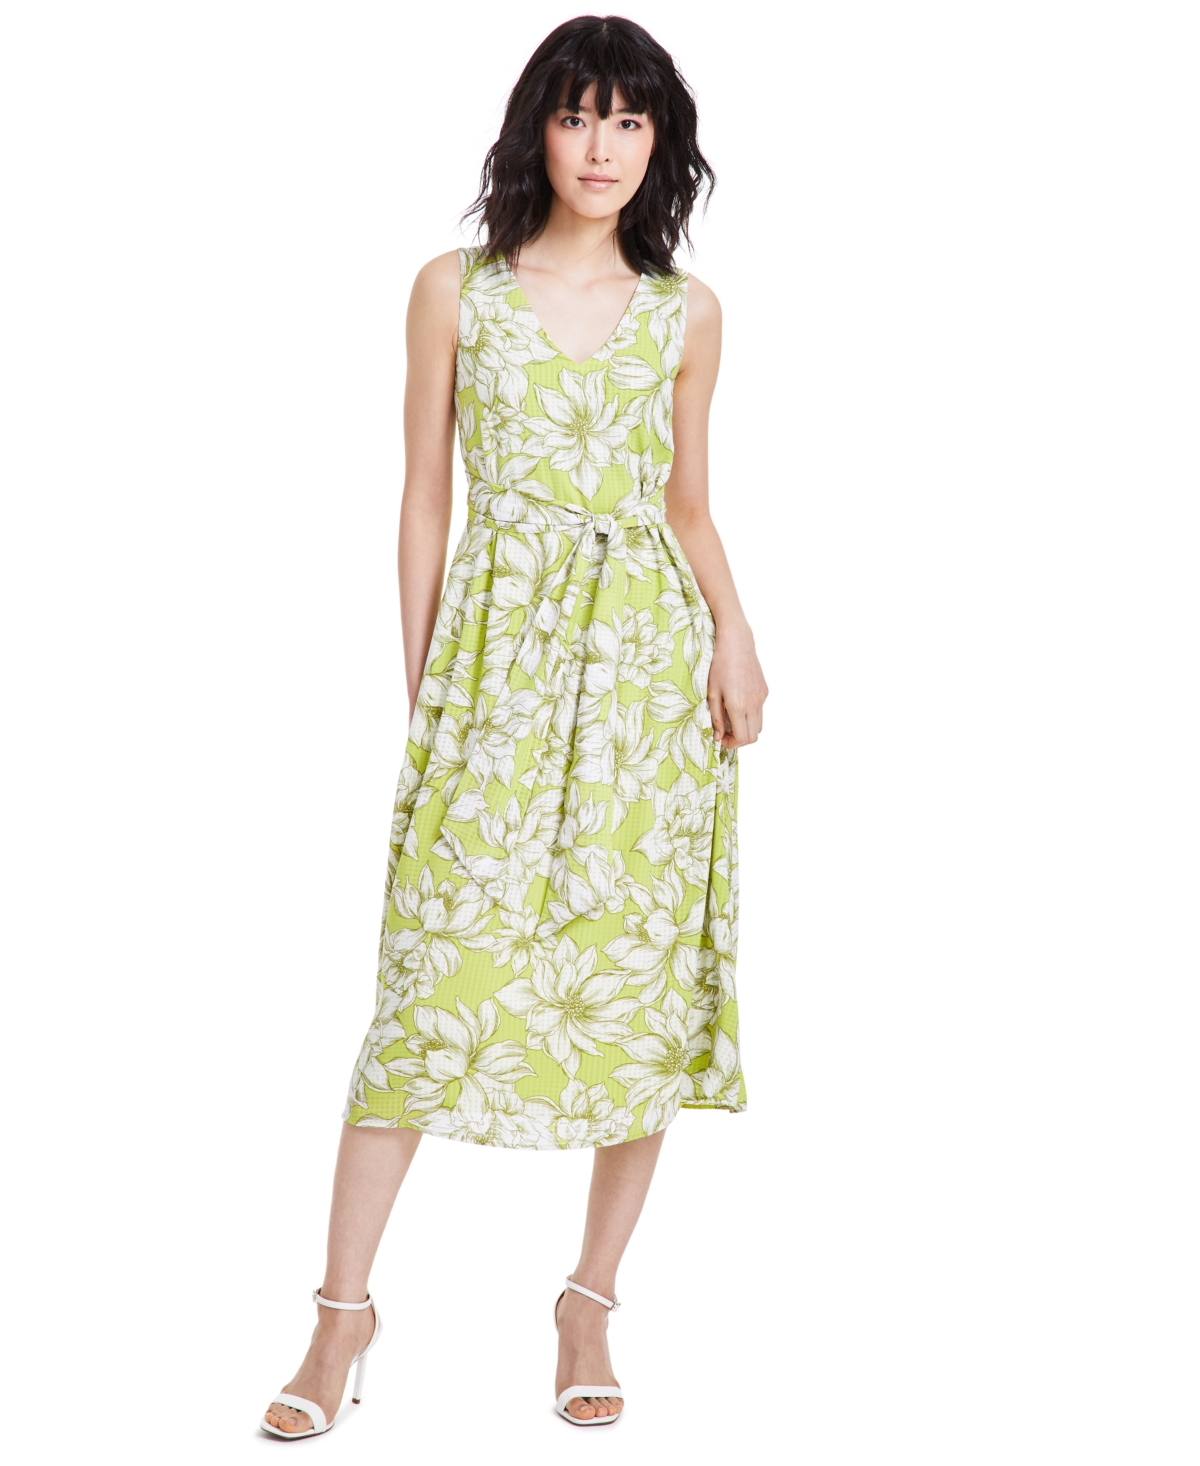 Women's Printed Belted Midi Dress - SPROUT/BRIGHT WHITE